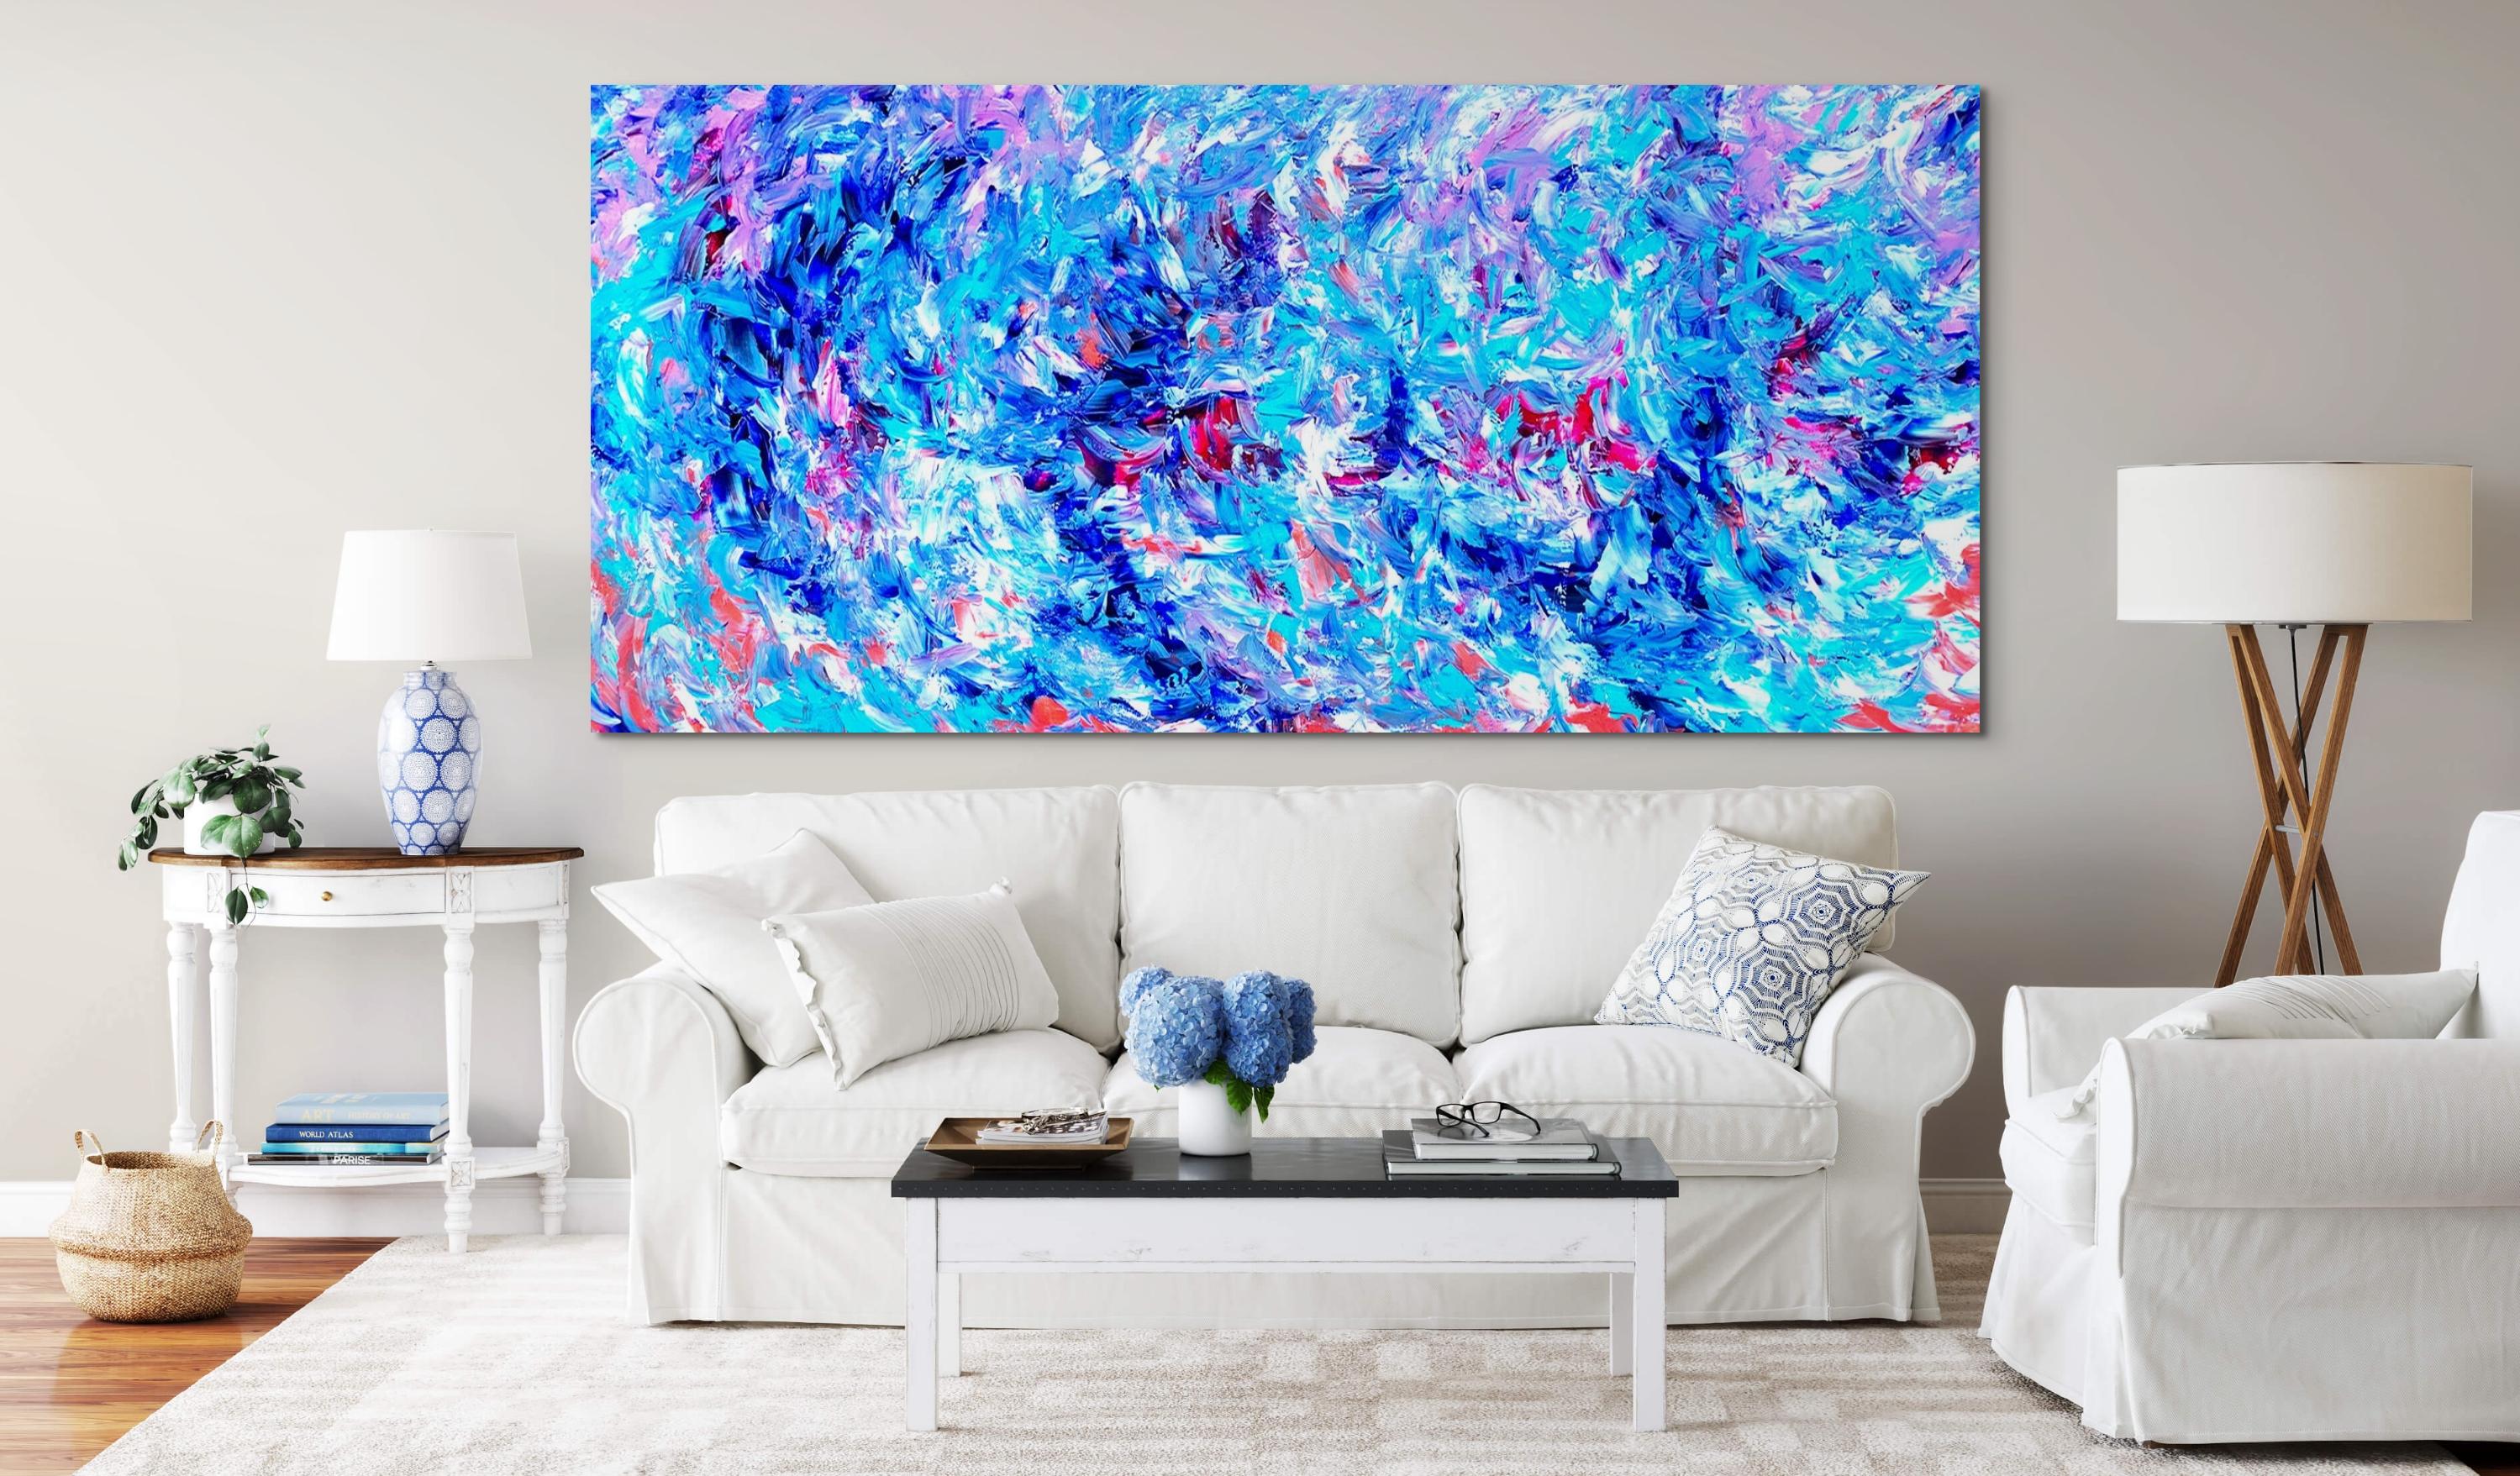 Blue Contemplation - Abstract Expressionist Painting by Estelle Asmodelle